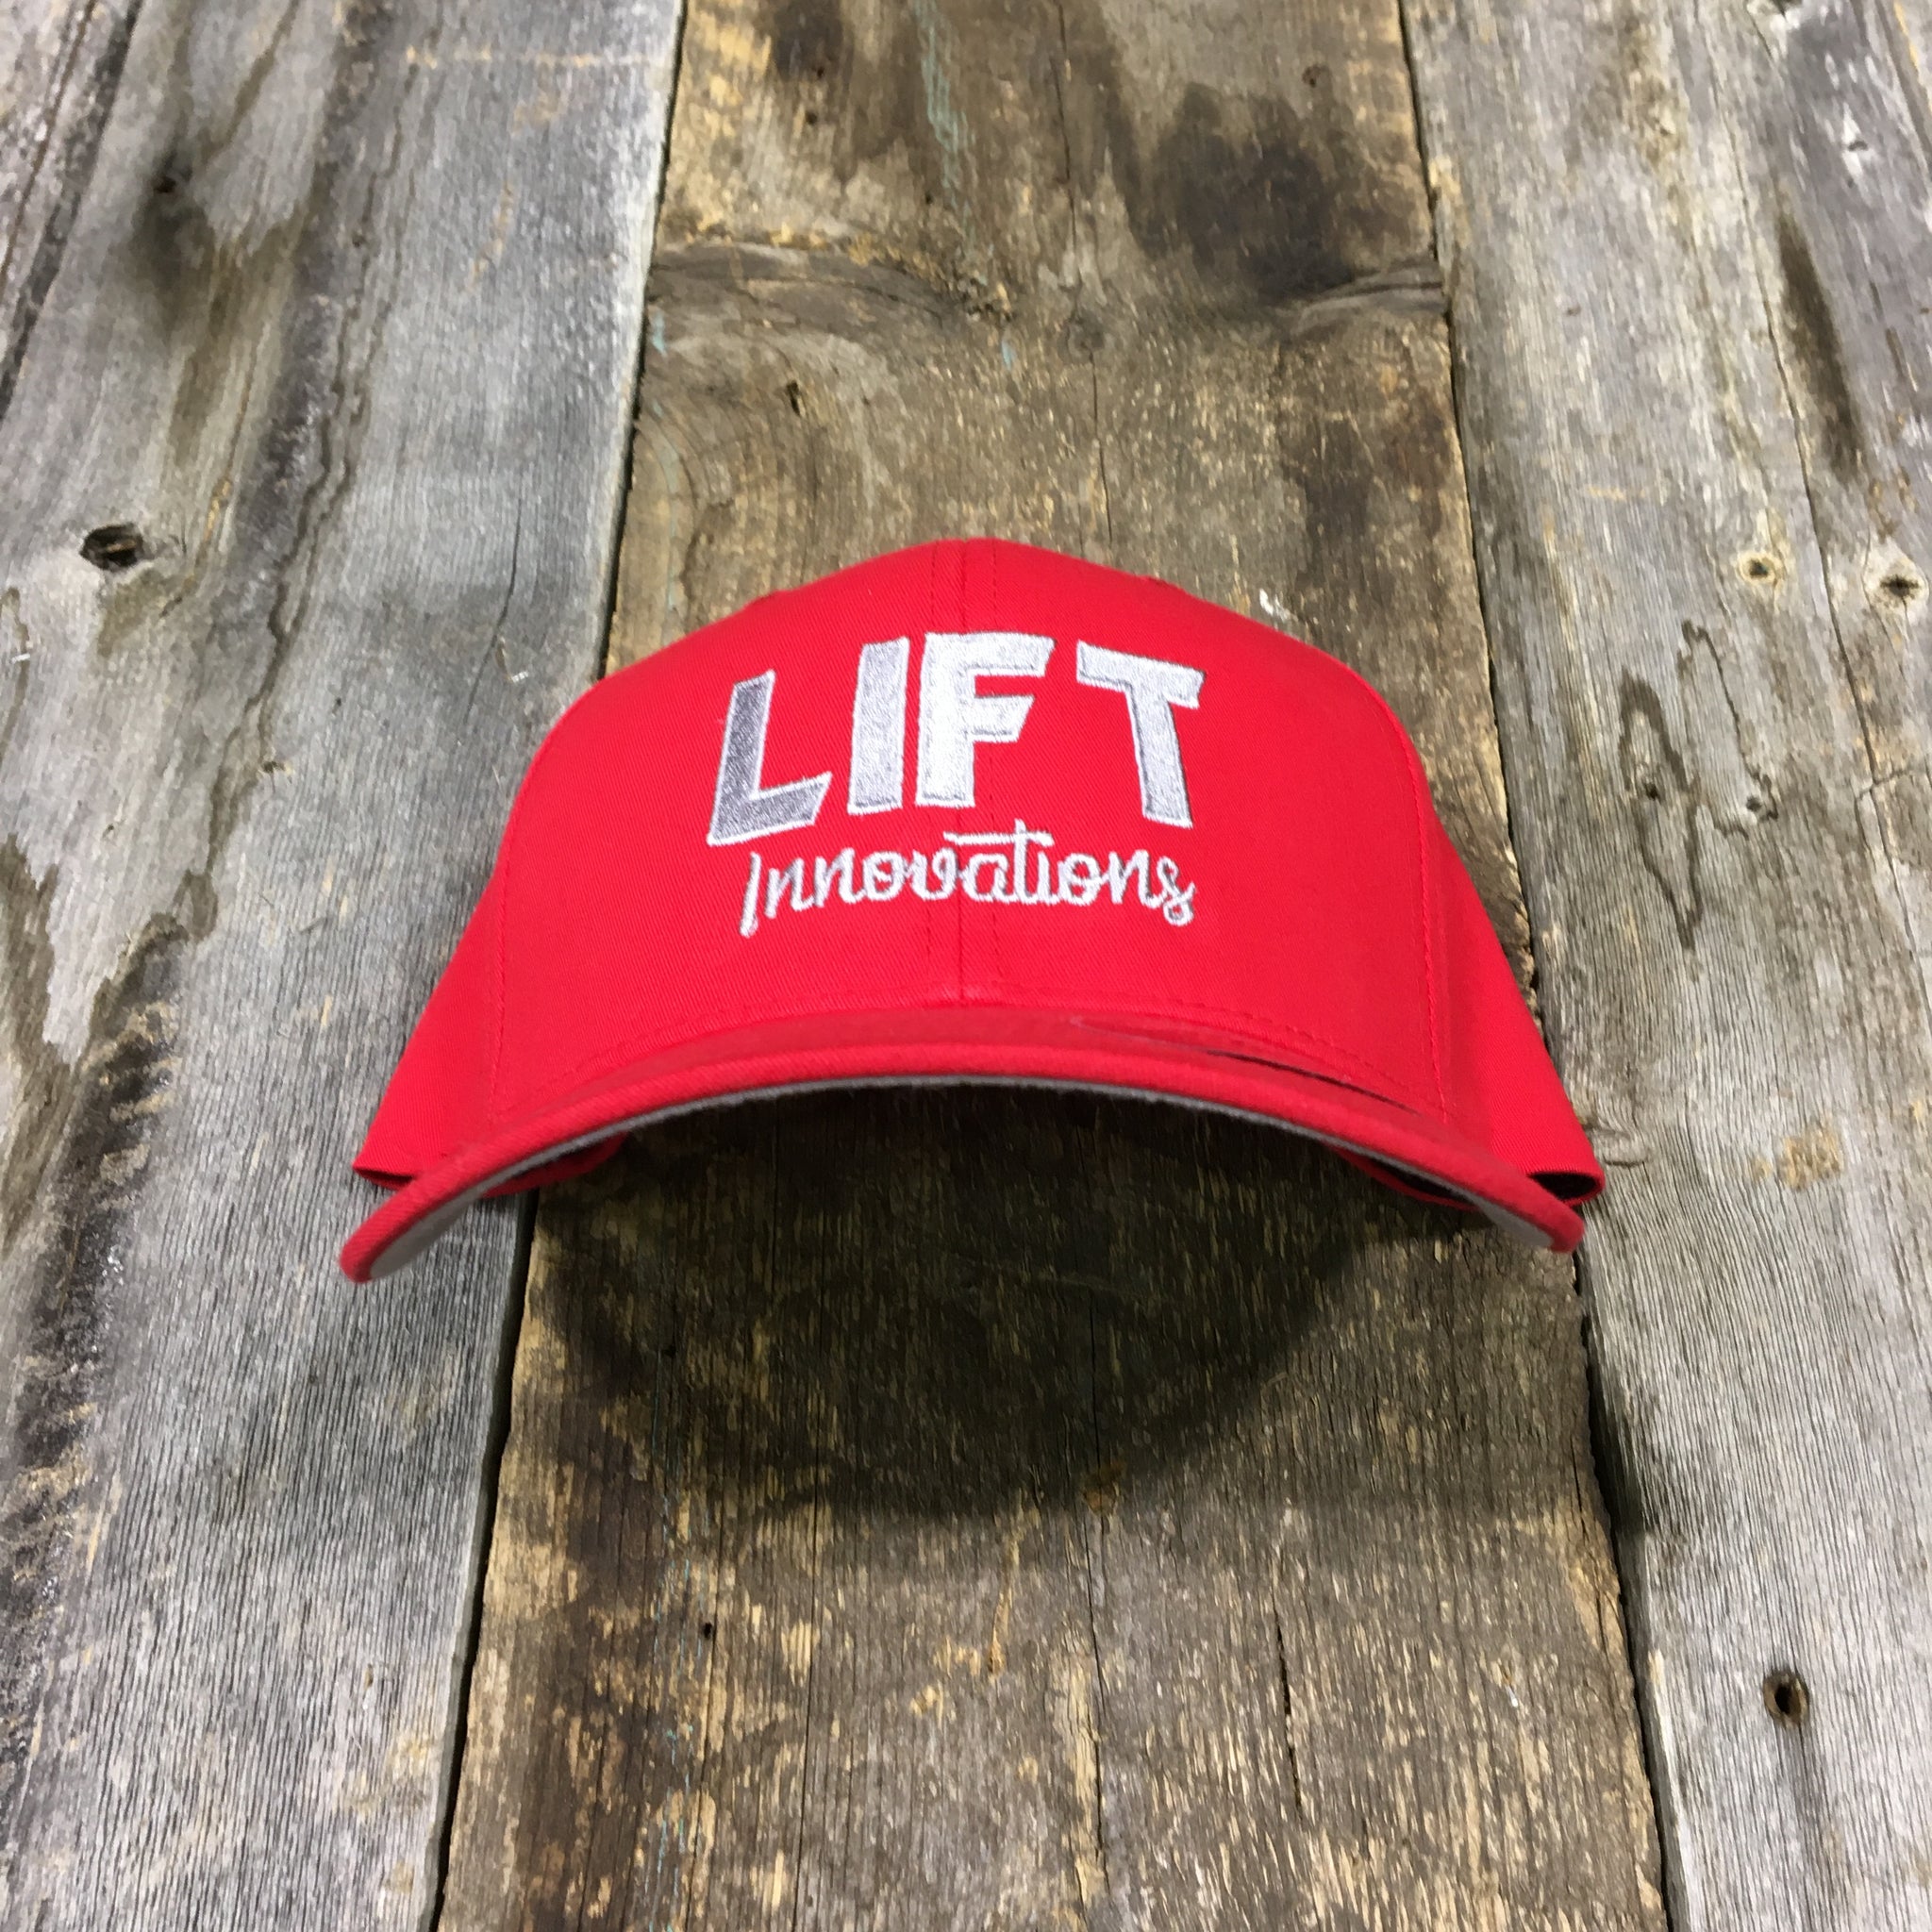 LIFT Innovations Curved-brim Flex-fit hat for Lift - May 2024 Innovations PRE-ORDER